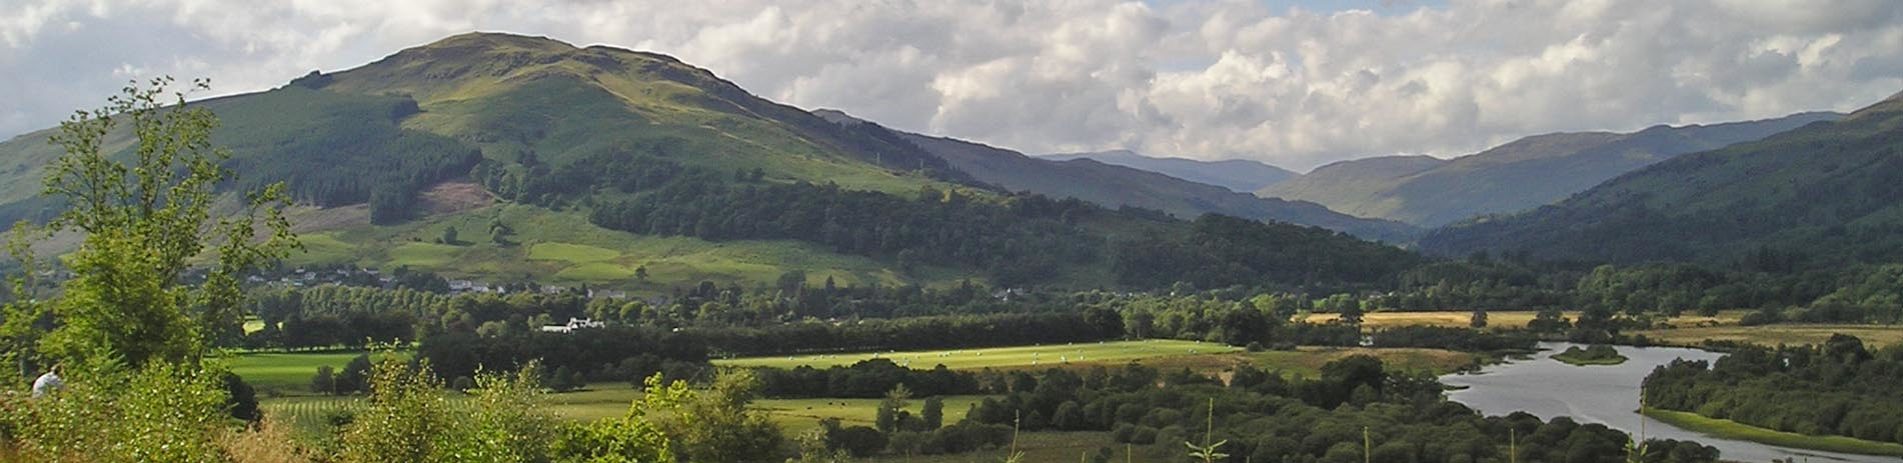 view-of-hills-and-river-in-the-auchmore-circuit-walk-in-killin